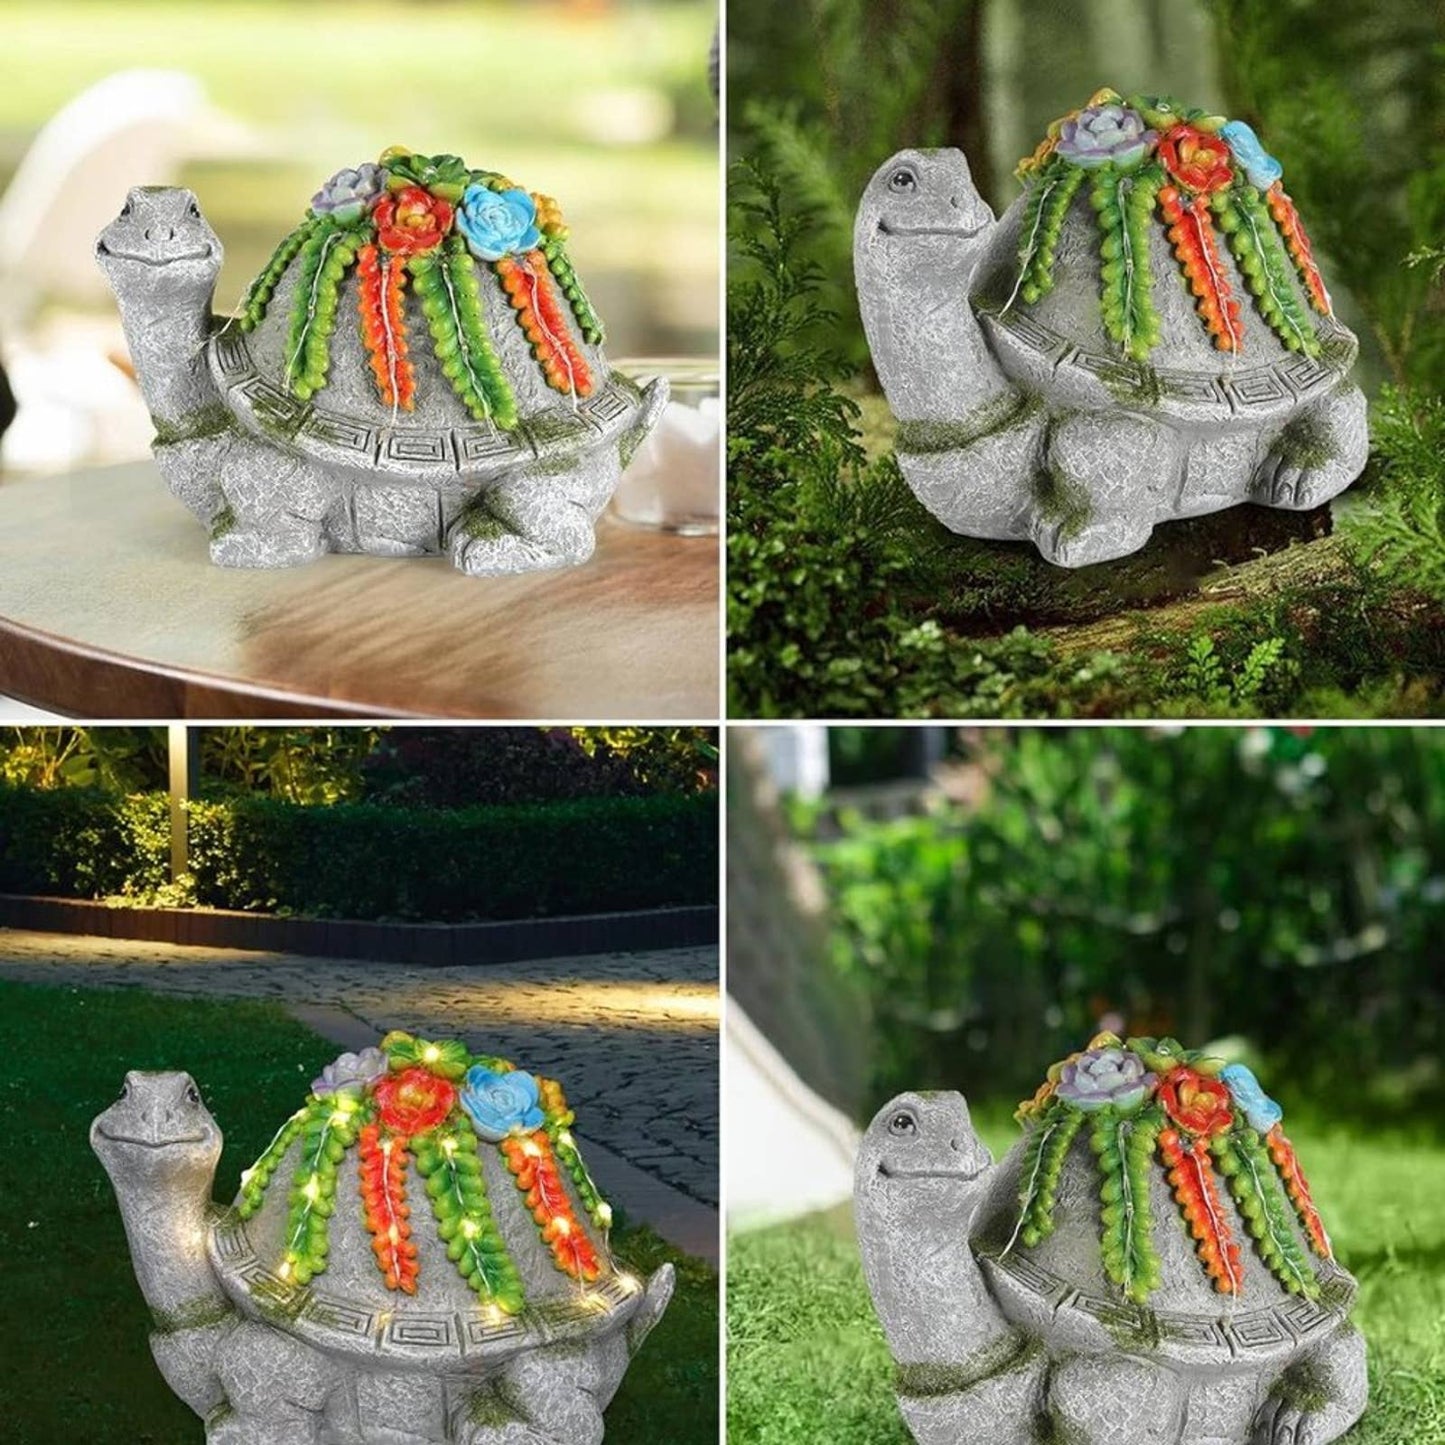 iStatue Solar Turtle Garden Statue with 19 Colorful Succulent LED - 8.3" x 6"